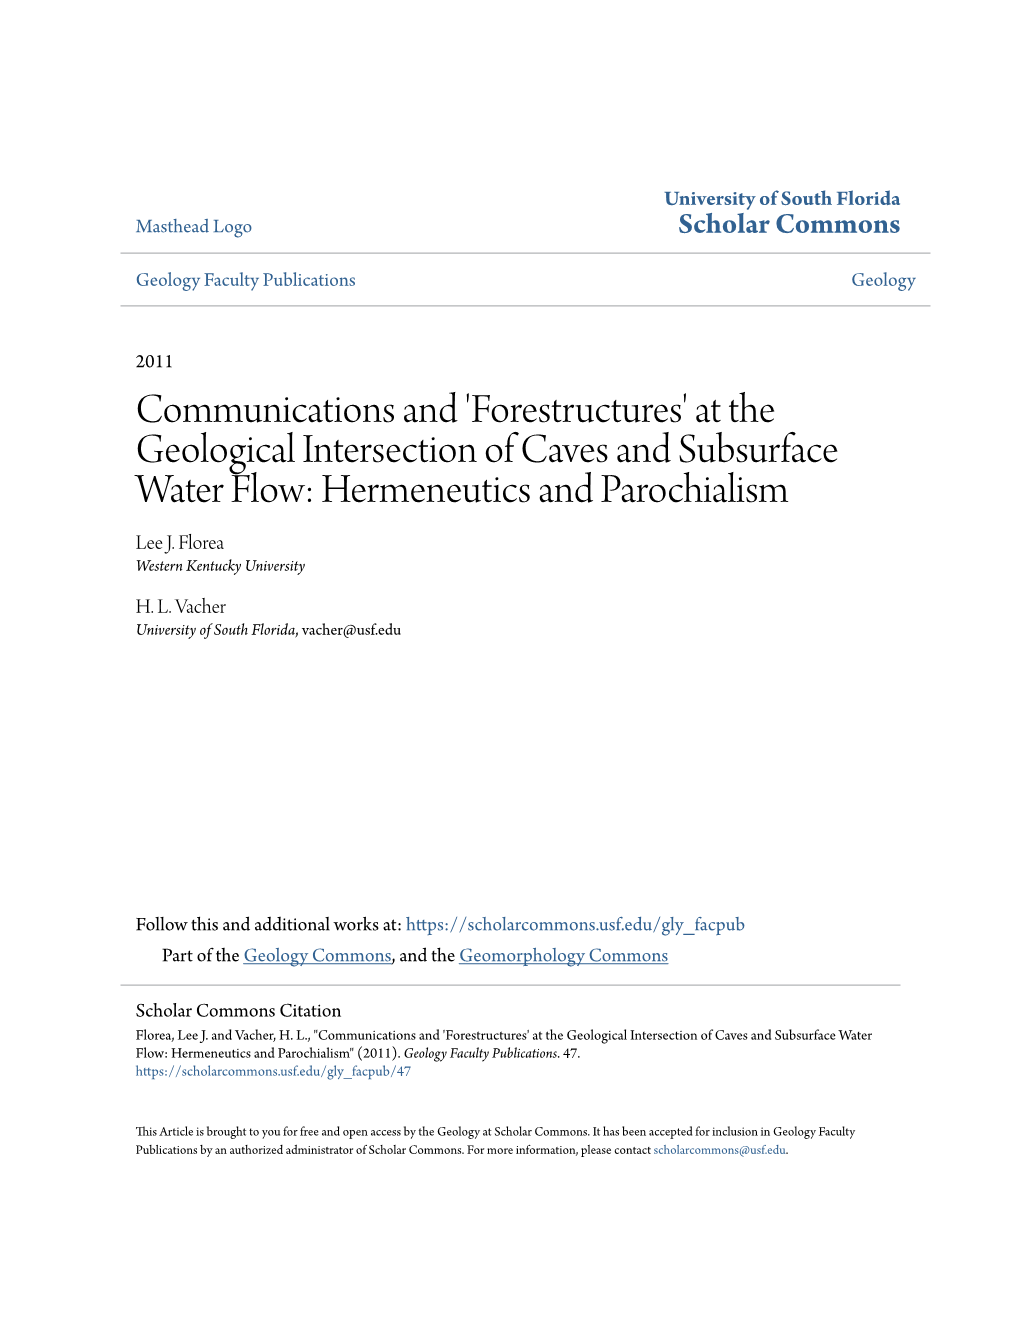 At the Geological Intersection of Caves and Subsurface Water Flow: Hermeneutics and Parochialism Lee J